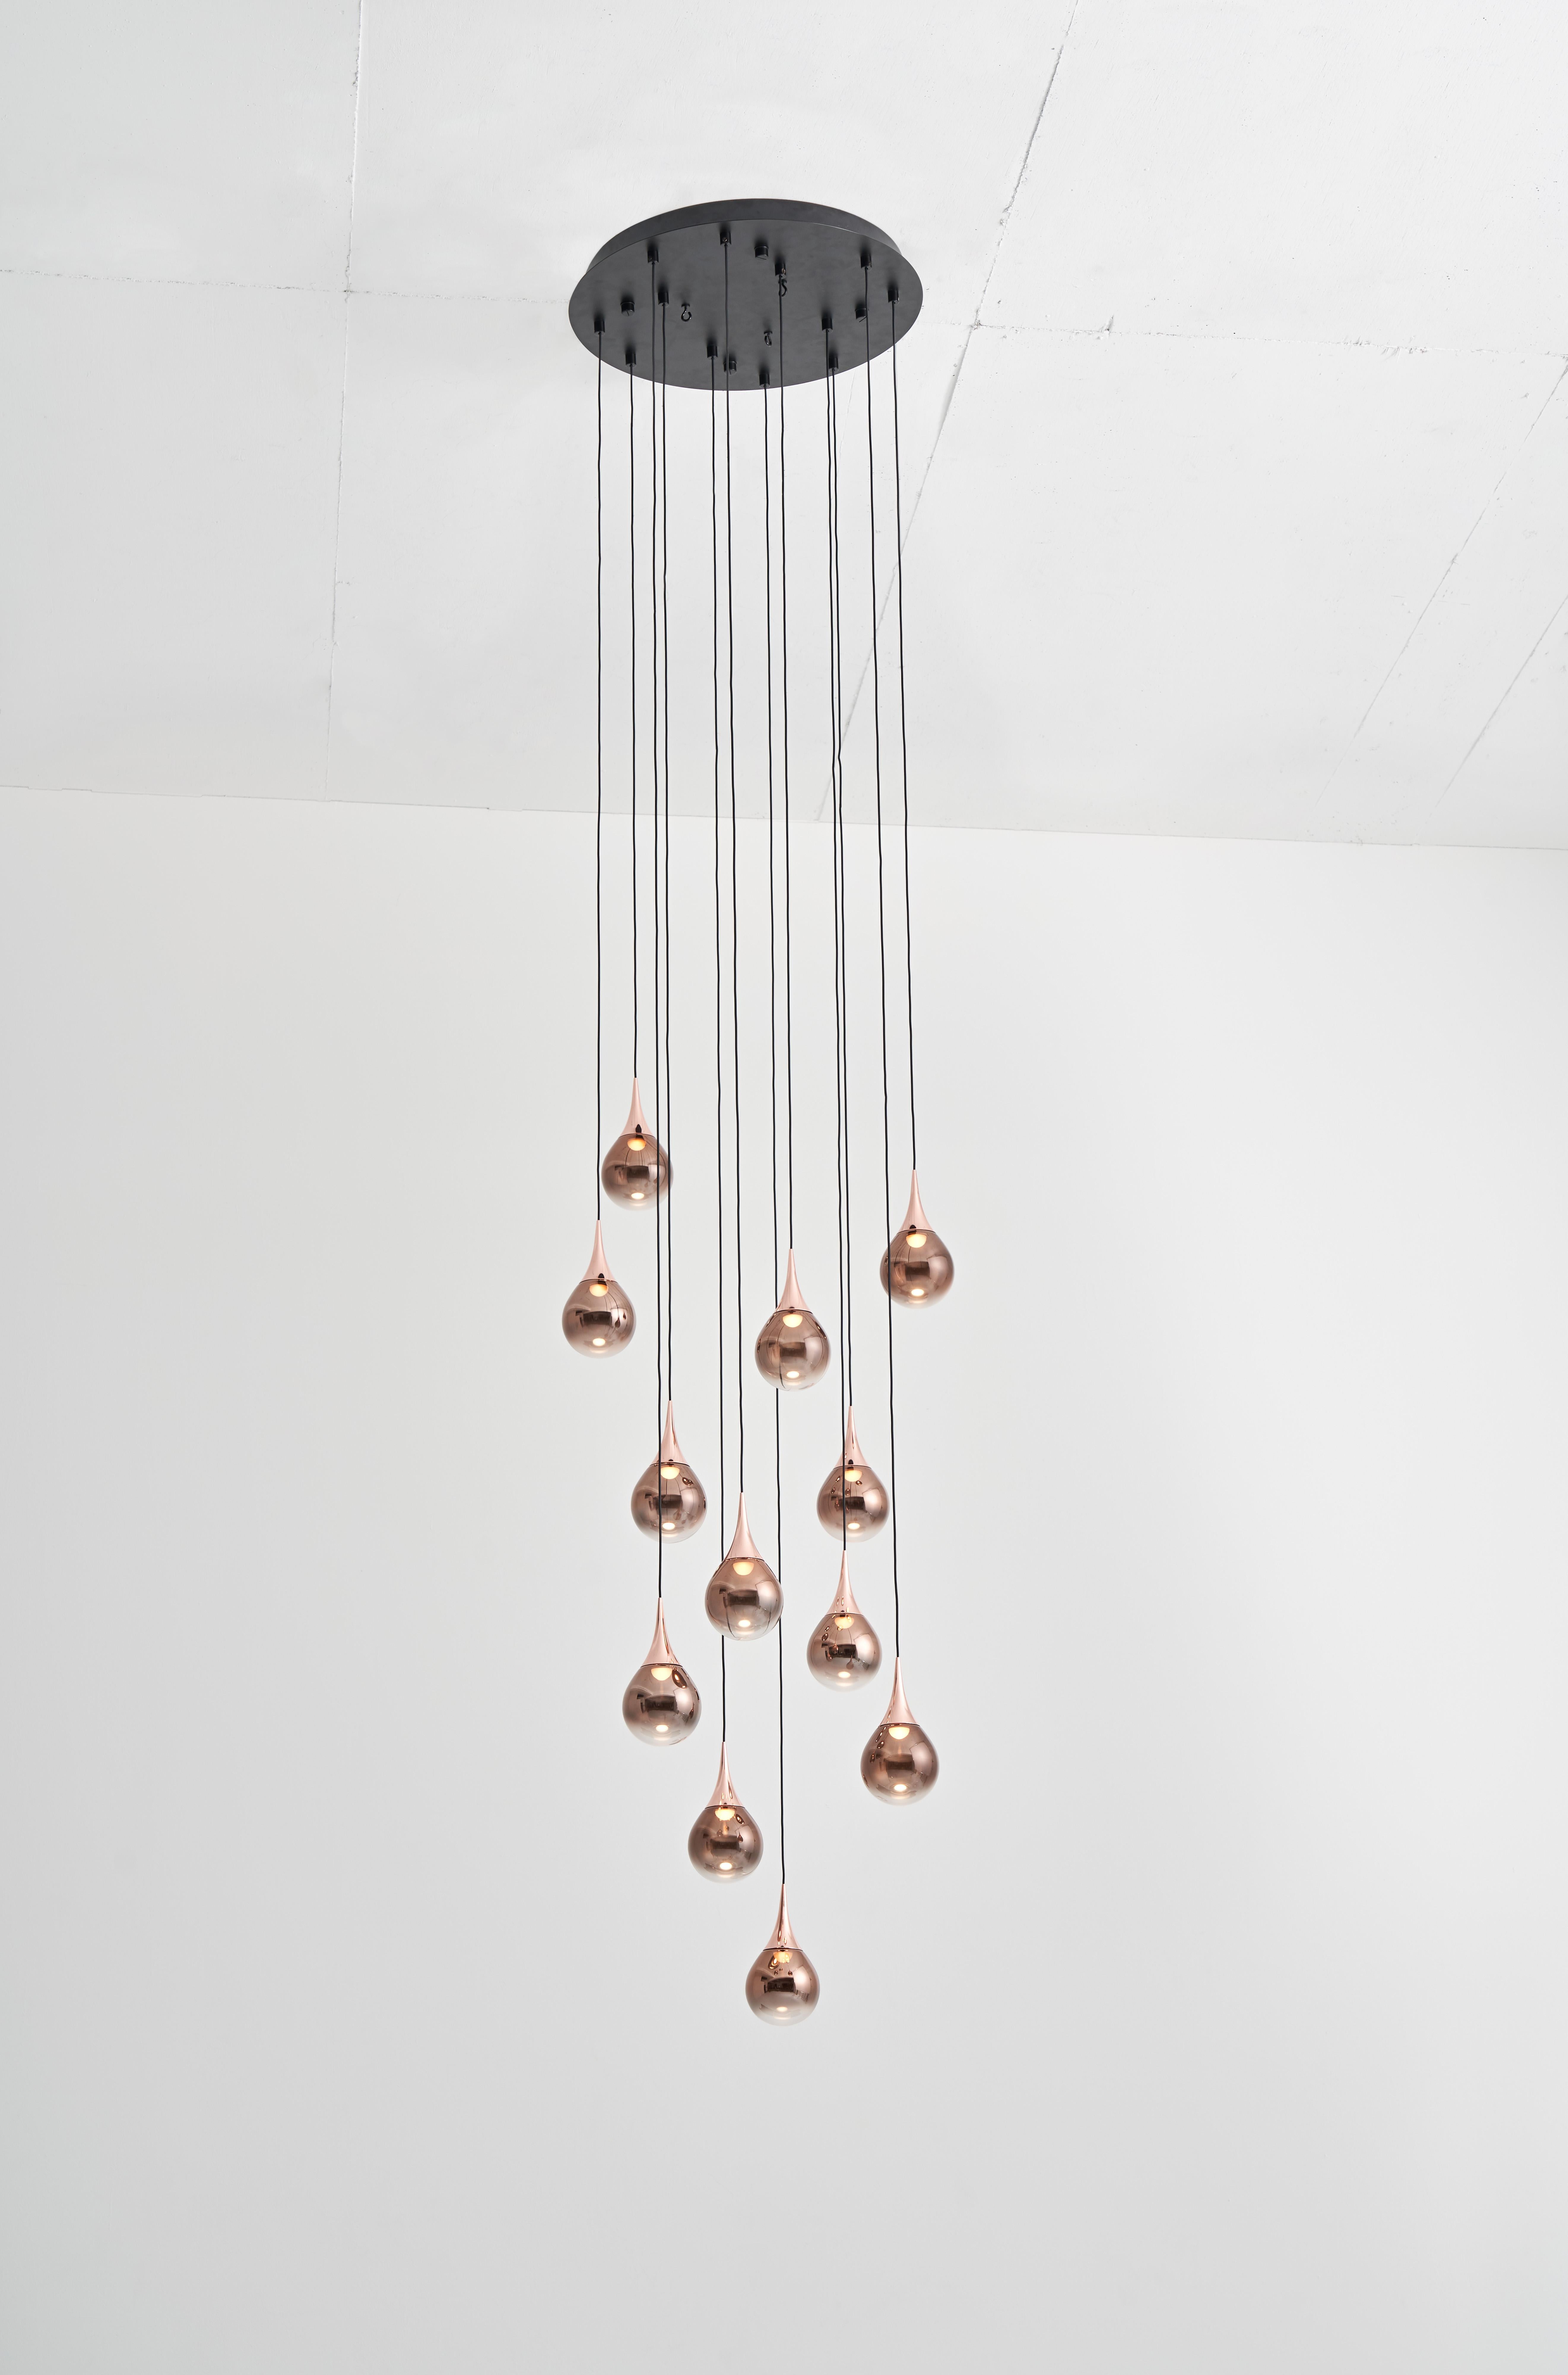 Inspired by artistry of fine jewelry, the PaoPao collection is available in three colorways, and multiple configurations. Each glass sphere of PAOPAO Pendant P12 is mouth-blown and vacuum plated to create a unique layered effect. The glass sphere